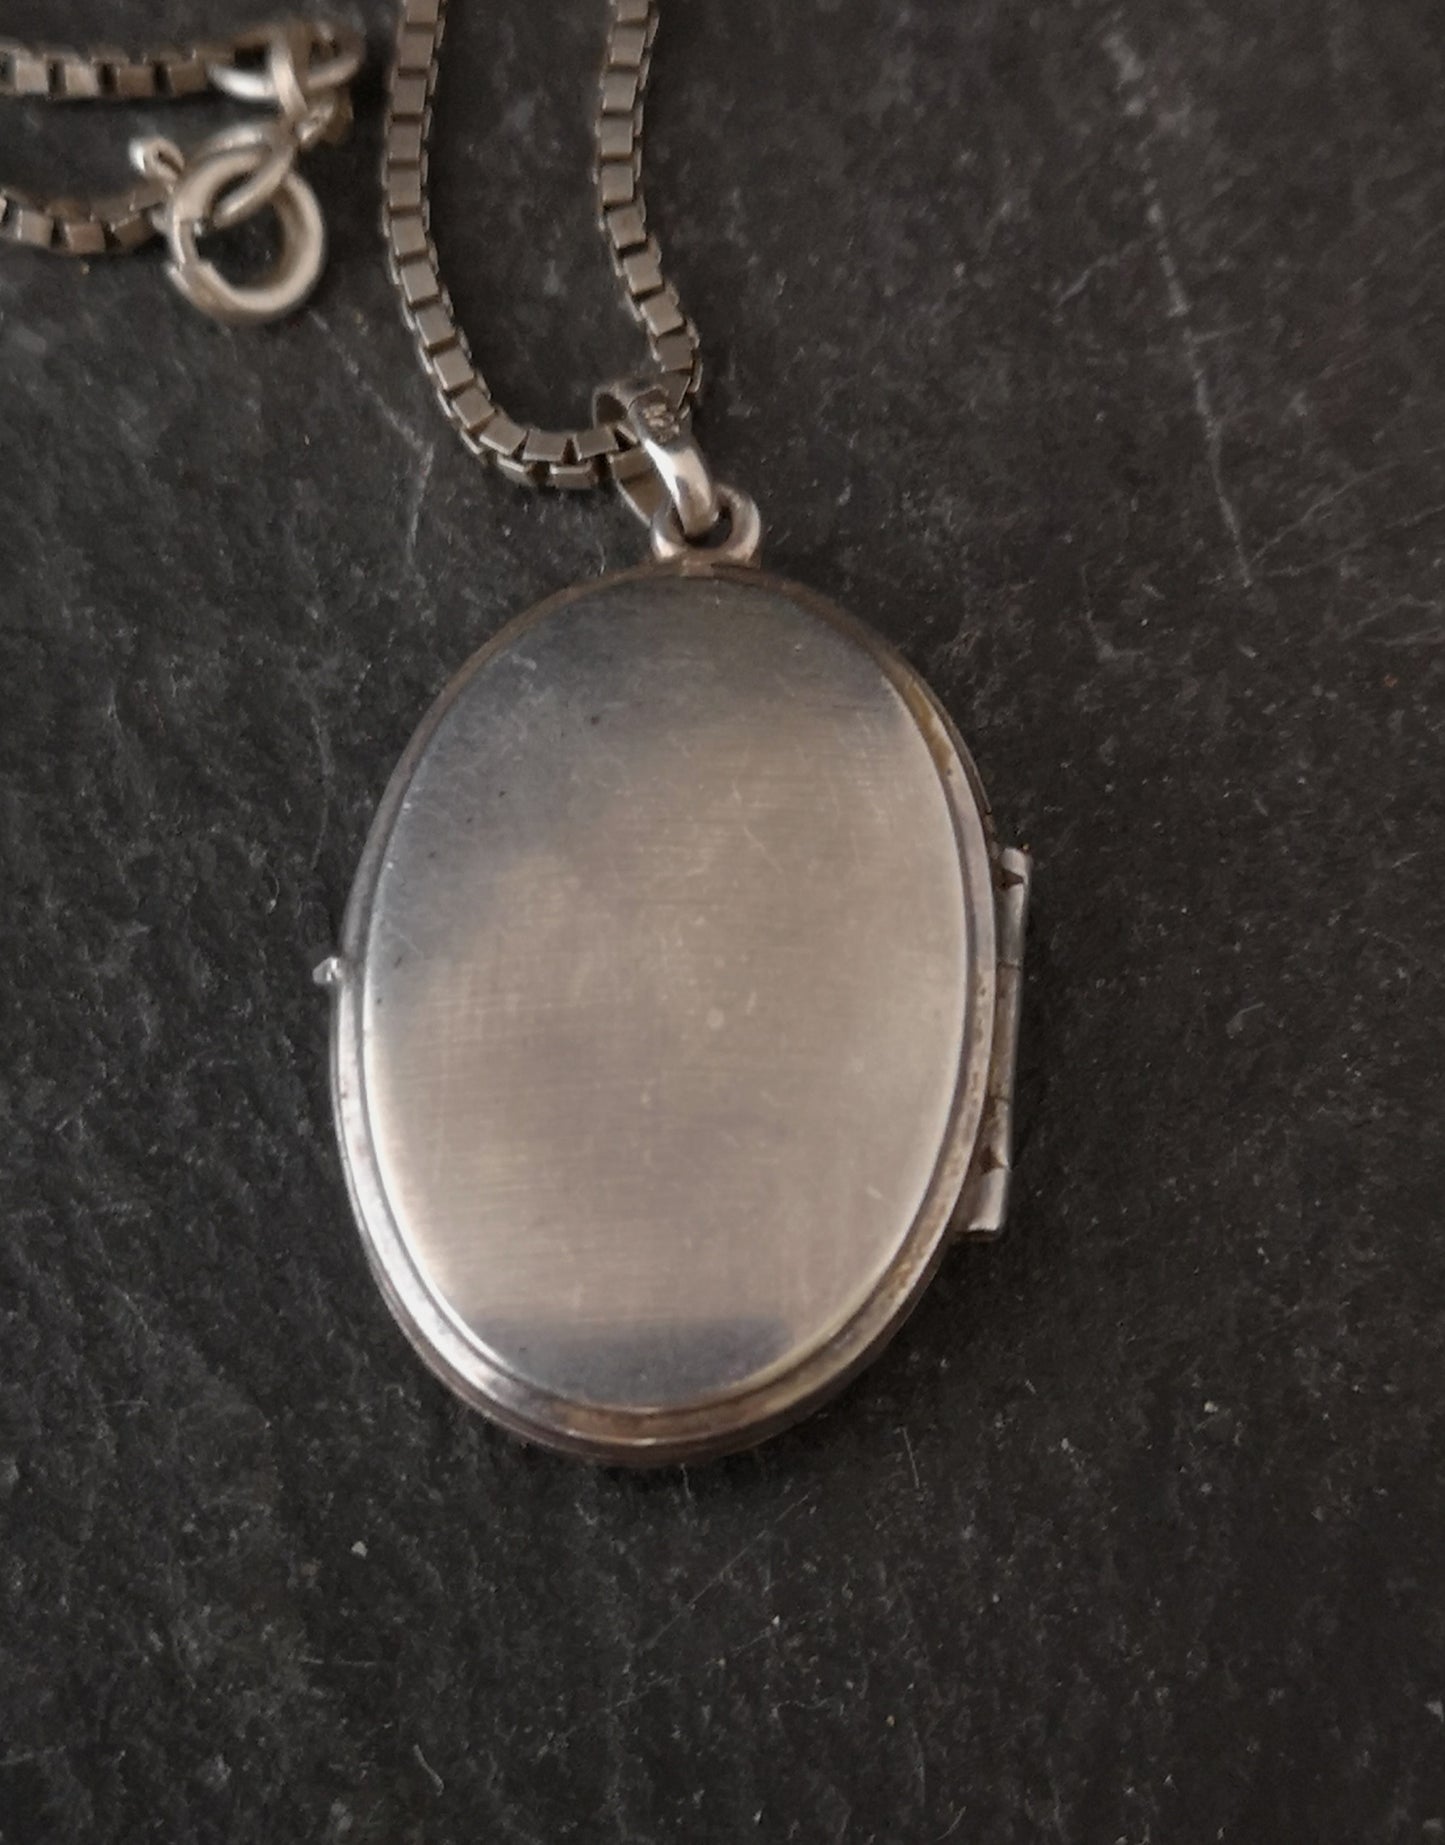 Vintage silver locket and chain, necklace